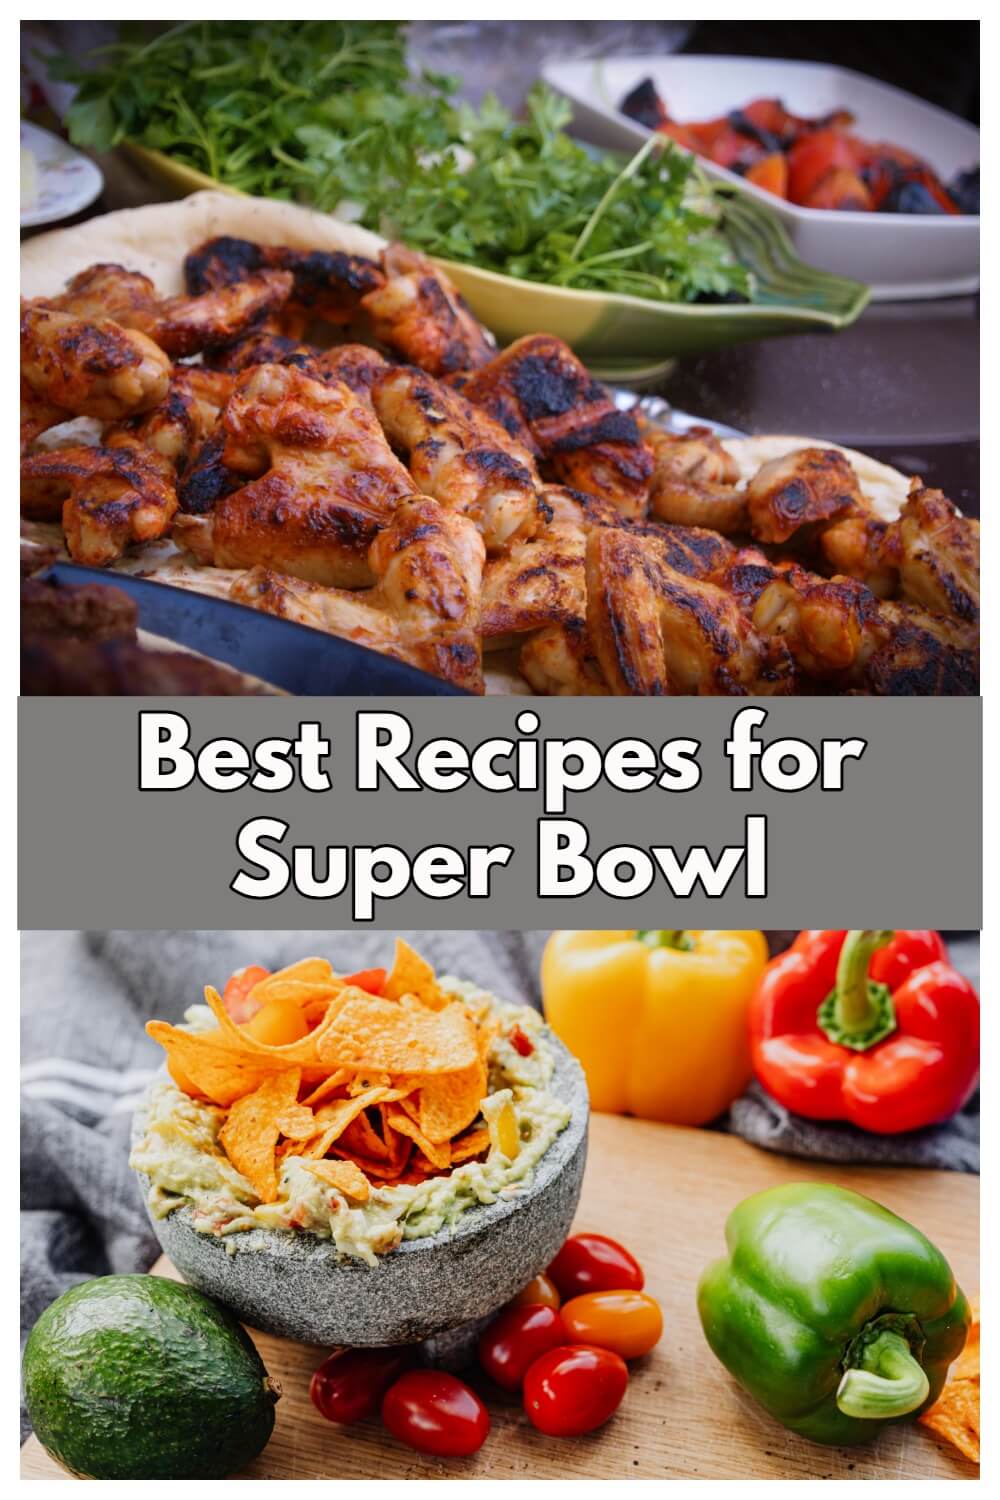 super bowl party spread consisting of chicken wings , tortilla chips and guacamole in a bowl, along with fresh veggies and herbs